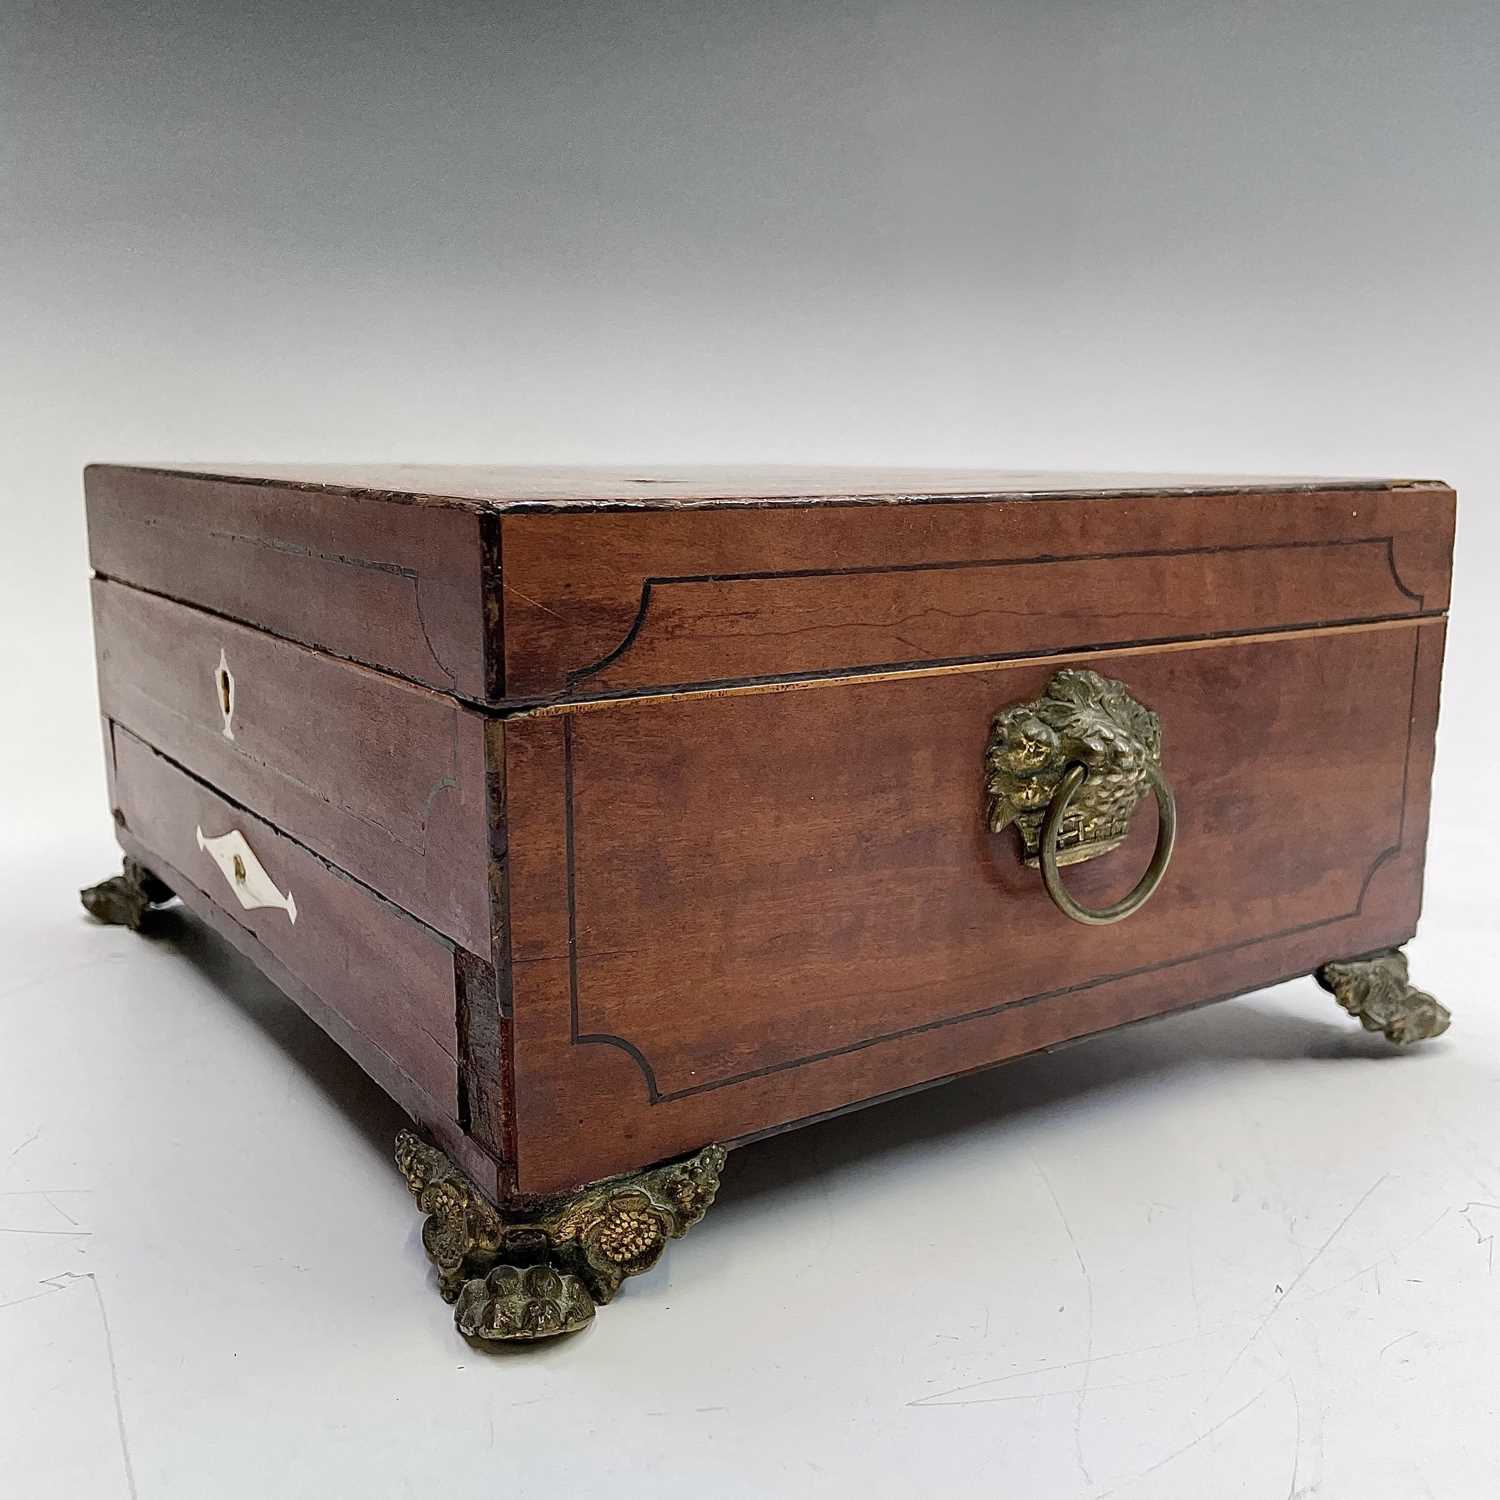 A Regency mahogany inlaid and crossbanded work box, with fitted interior and a lower drawer with - Image 3 of 7